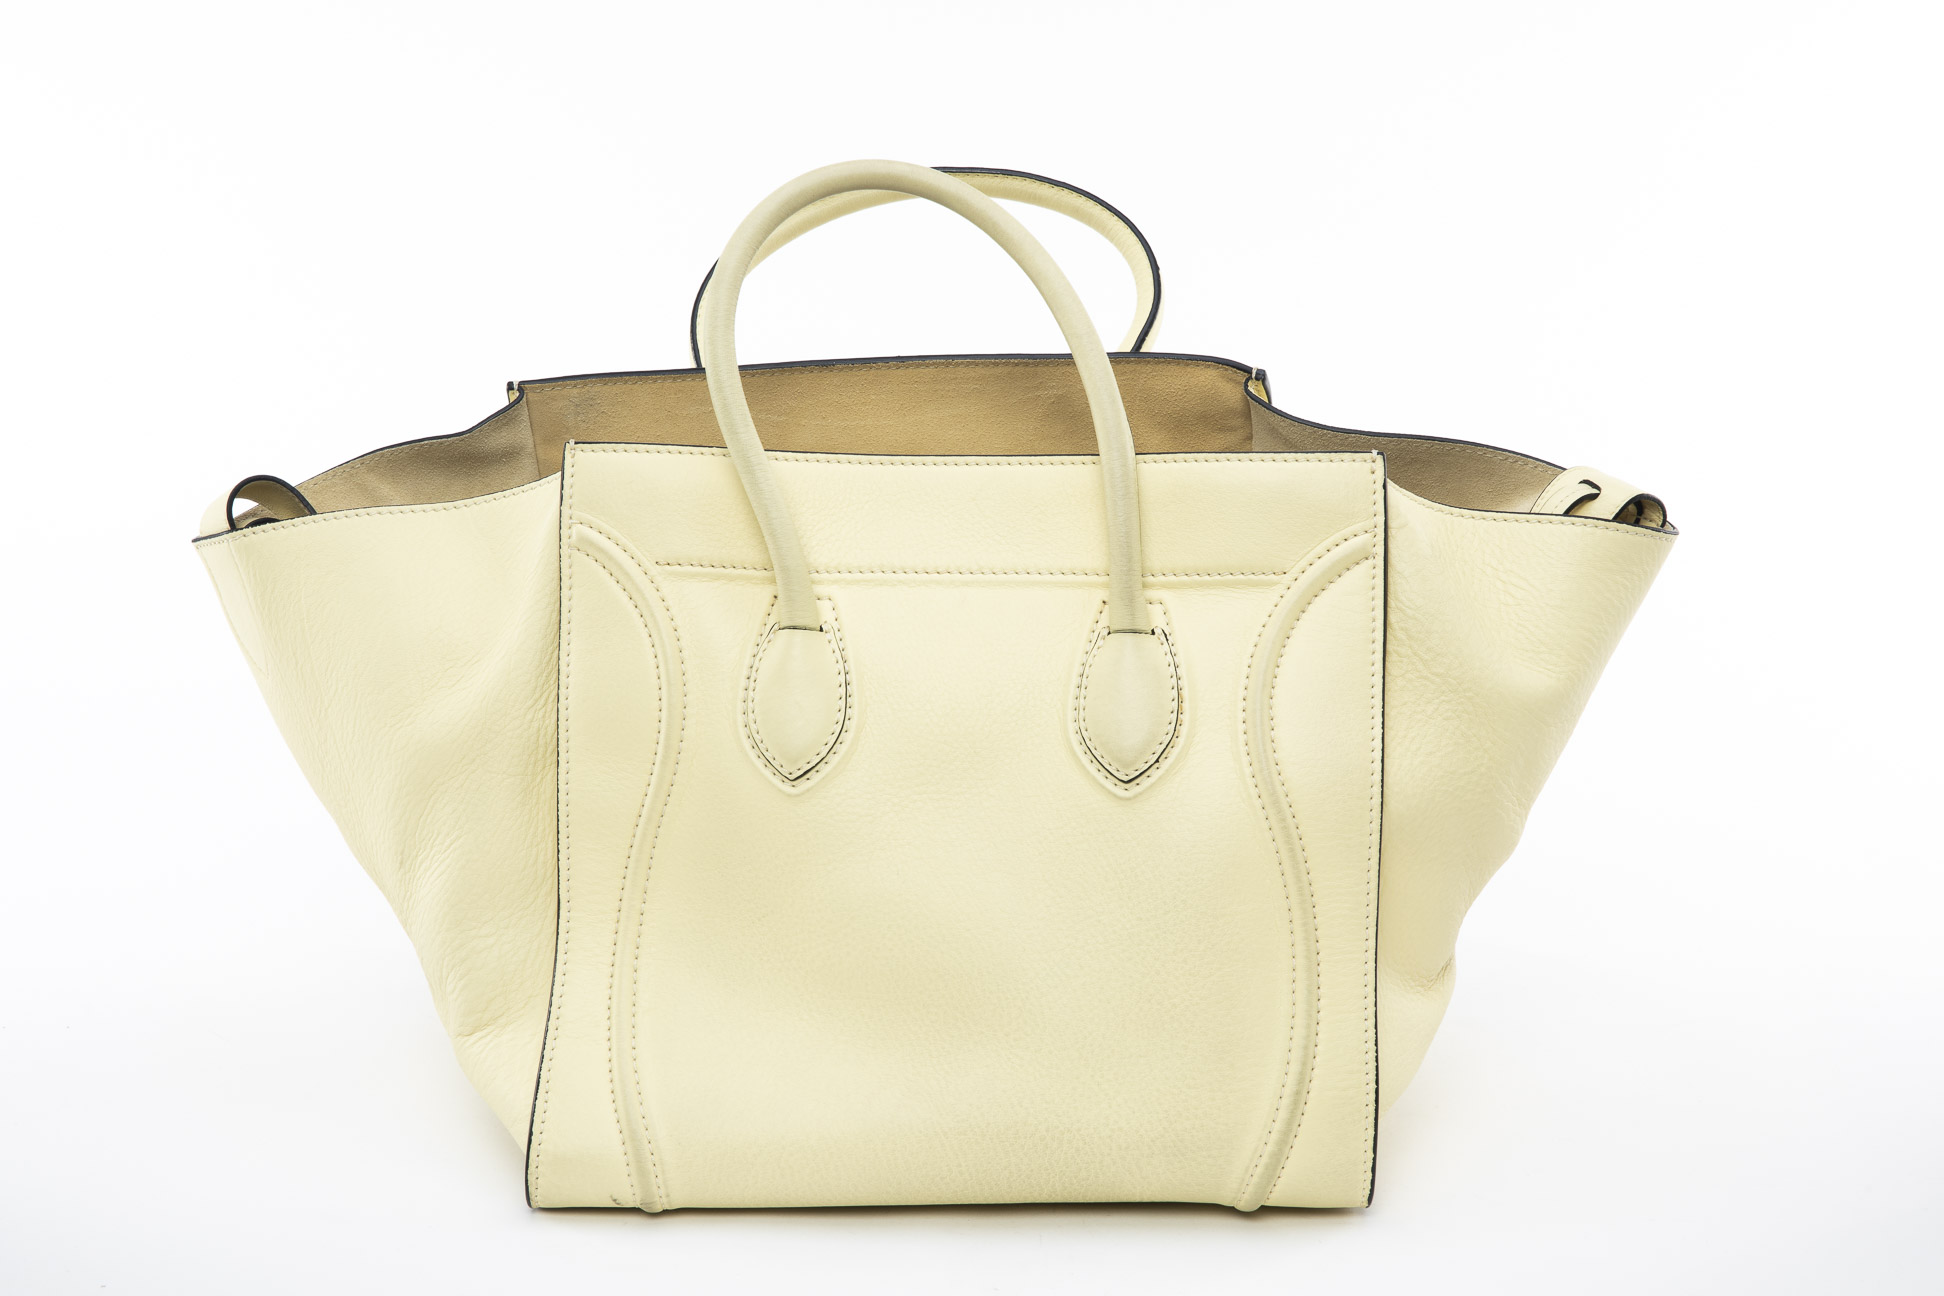 A CELINE 'PHANTOM LUGGAGE' PALE YELLOW TOTE - Image 3 of 6